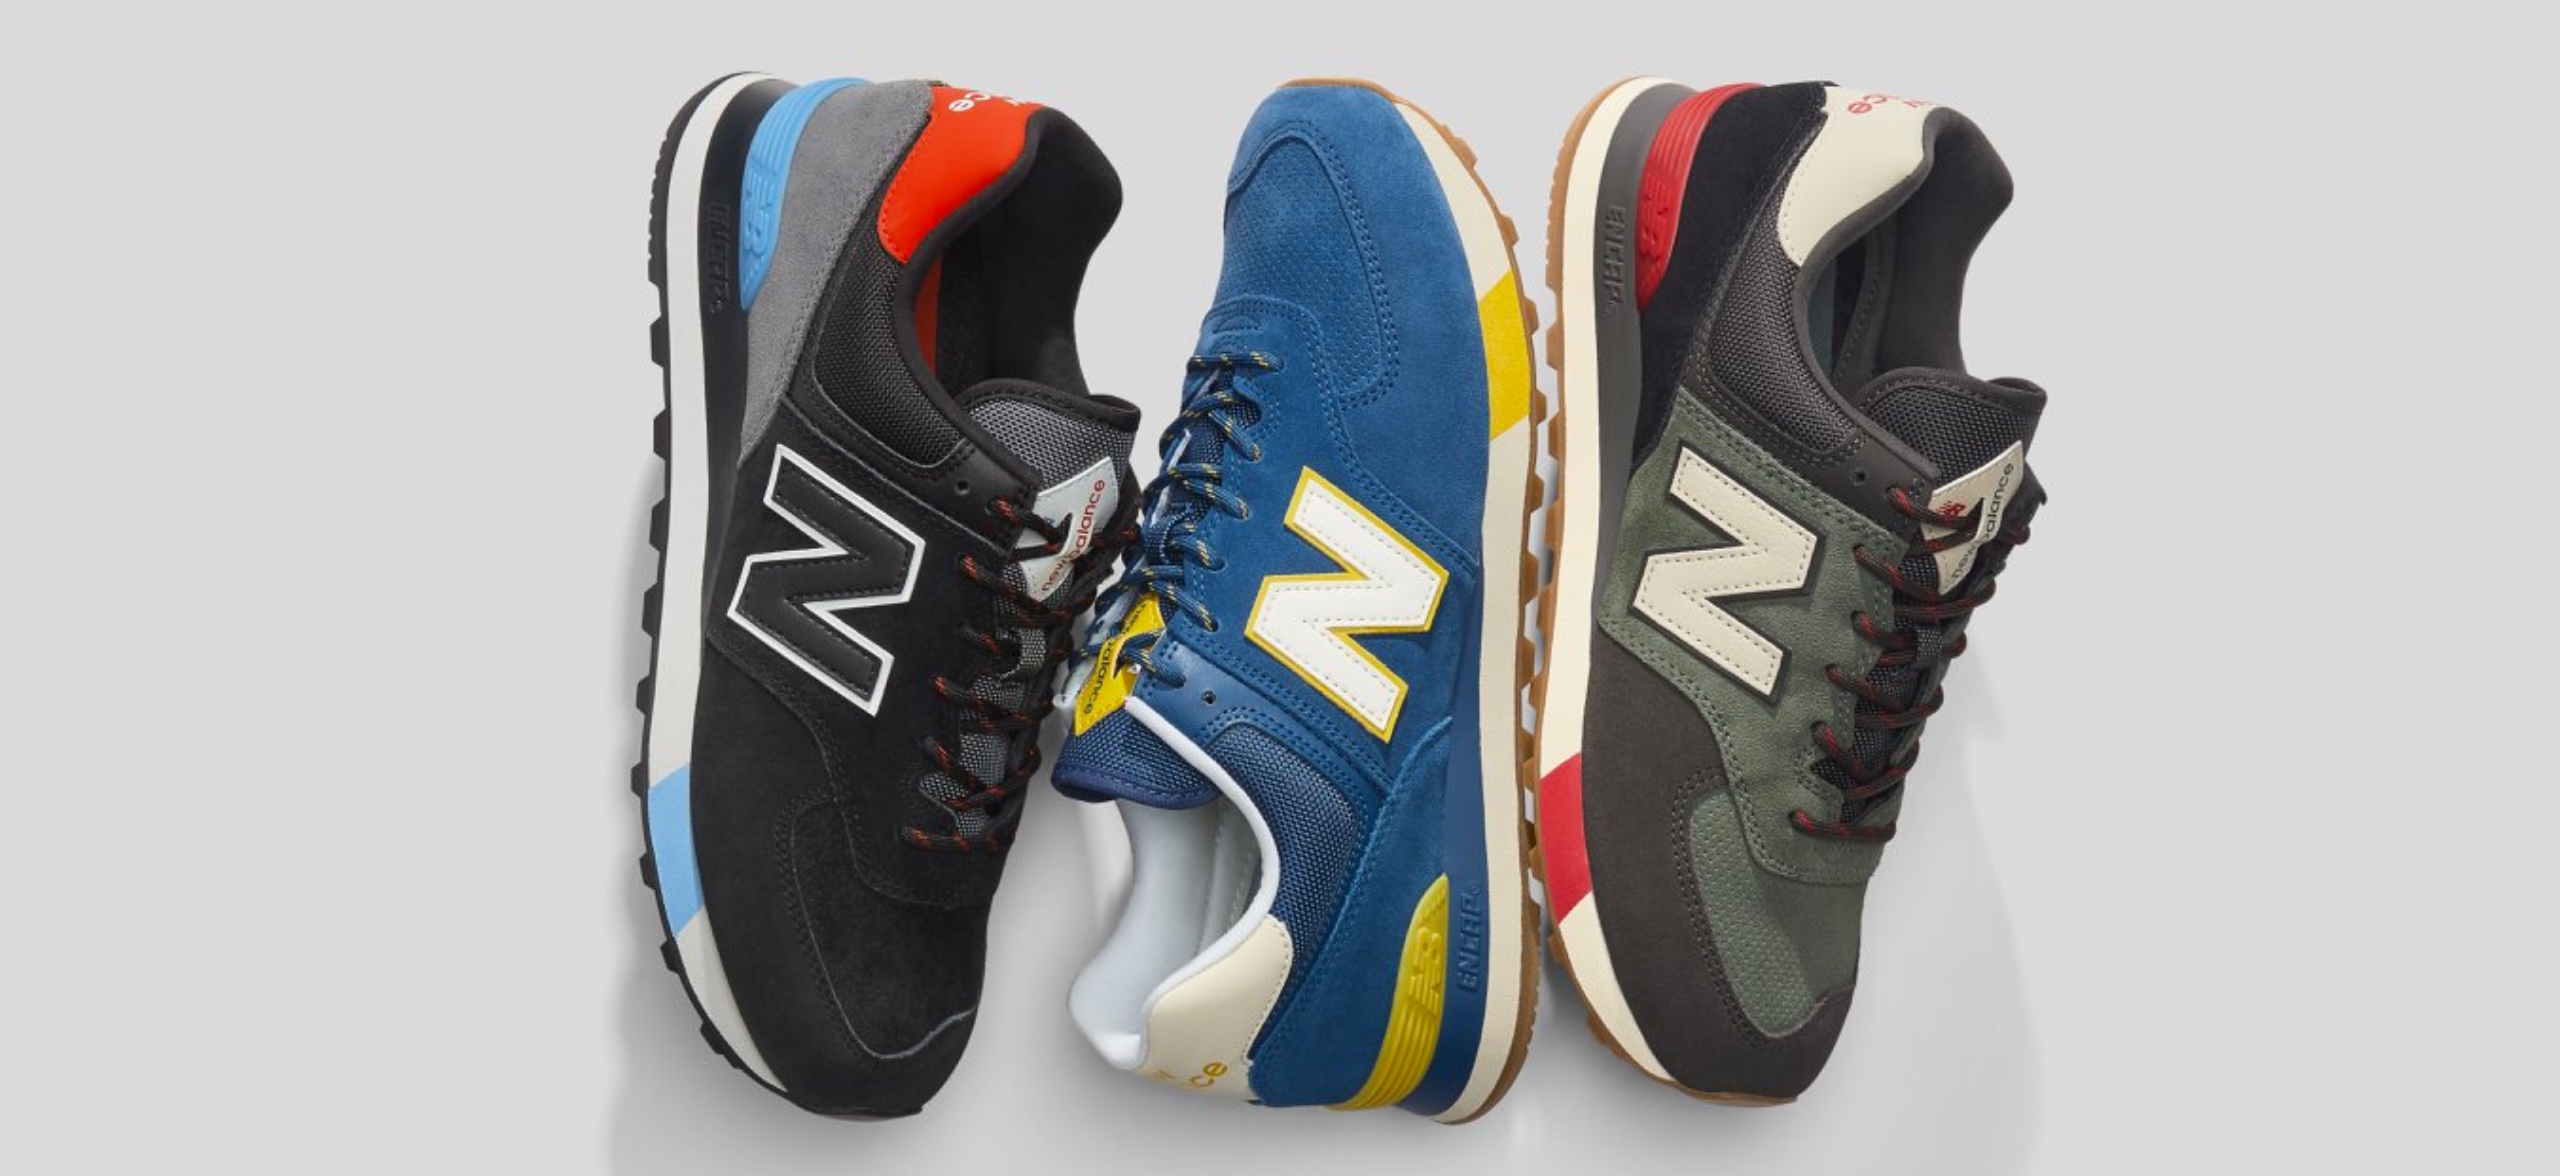 Joe's New Balance Holiday Savings offers 20% off all orders + free shipping